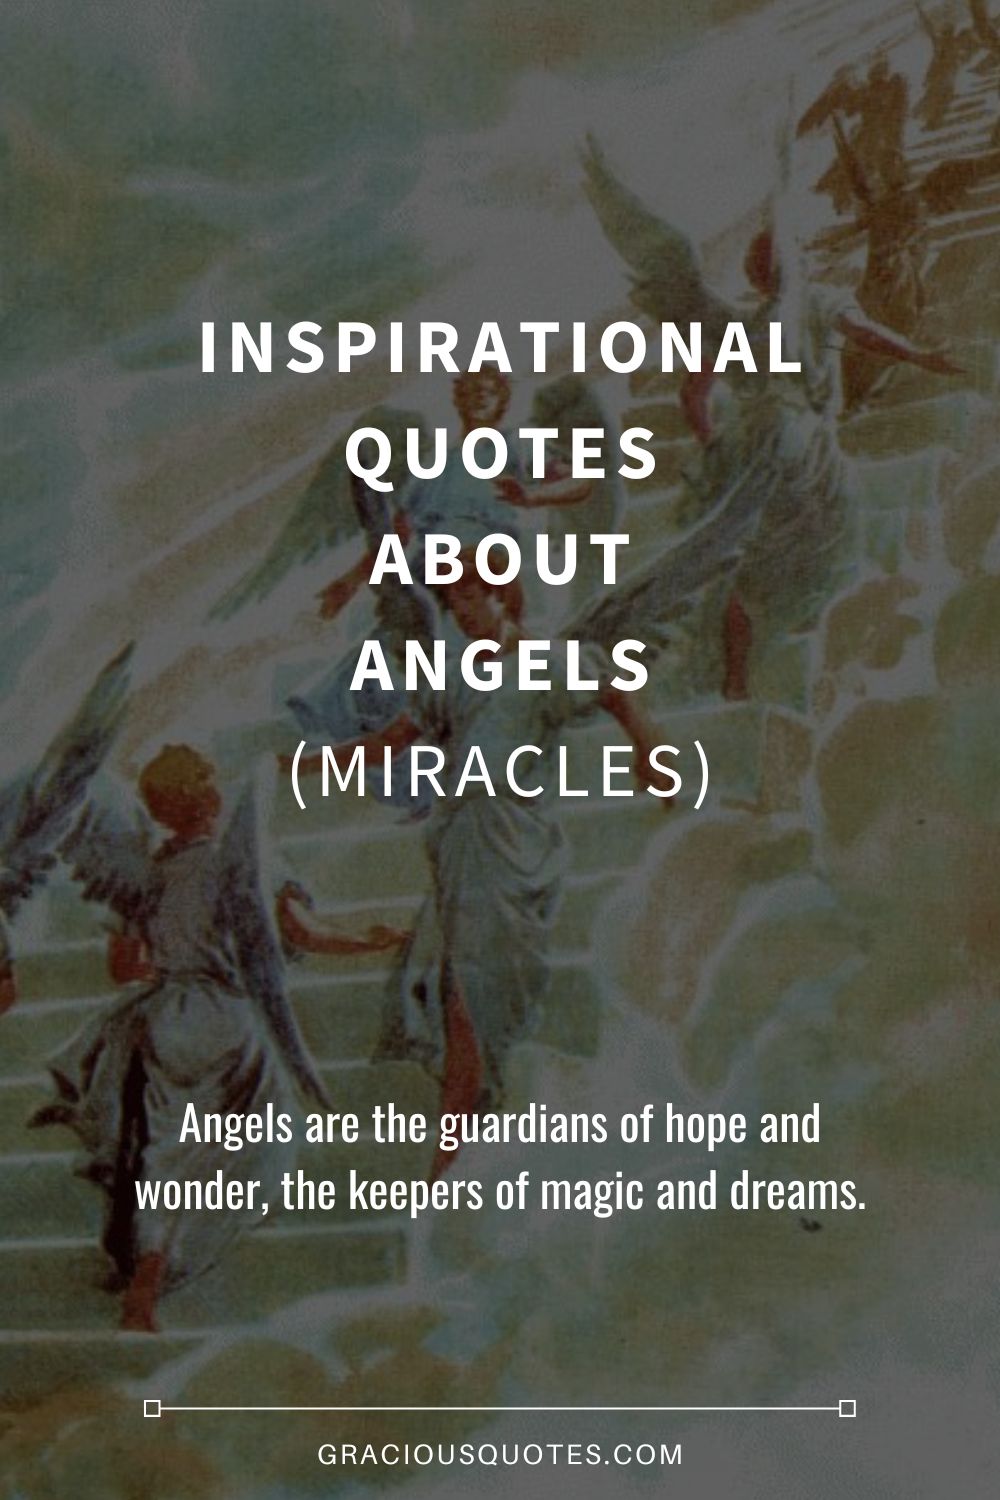 Inspirational Quotes About Angels (MIRACLES) - Gracious Quotes